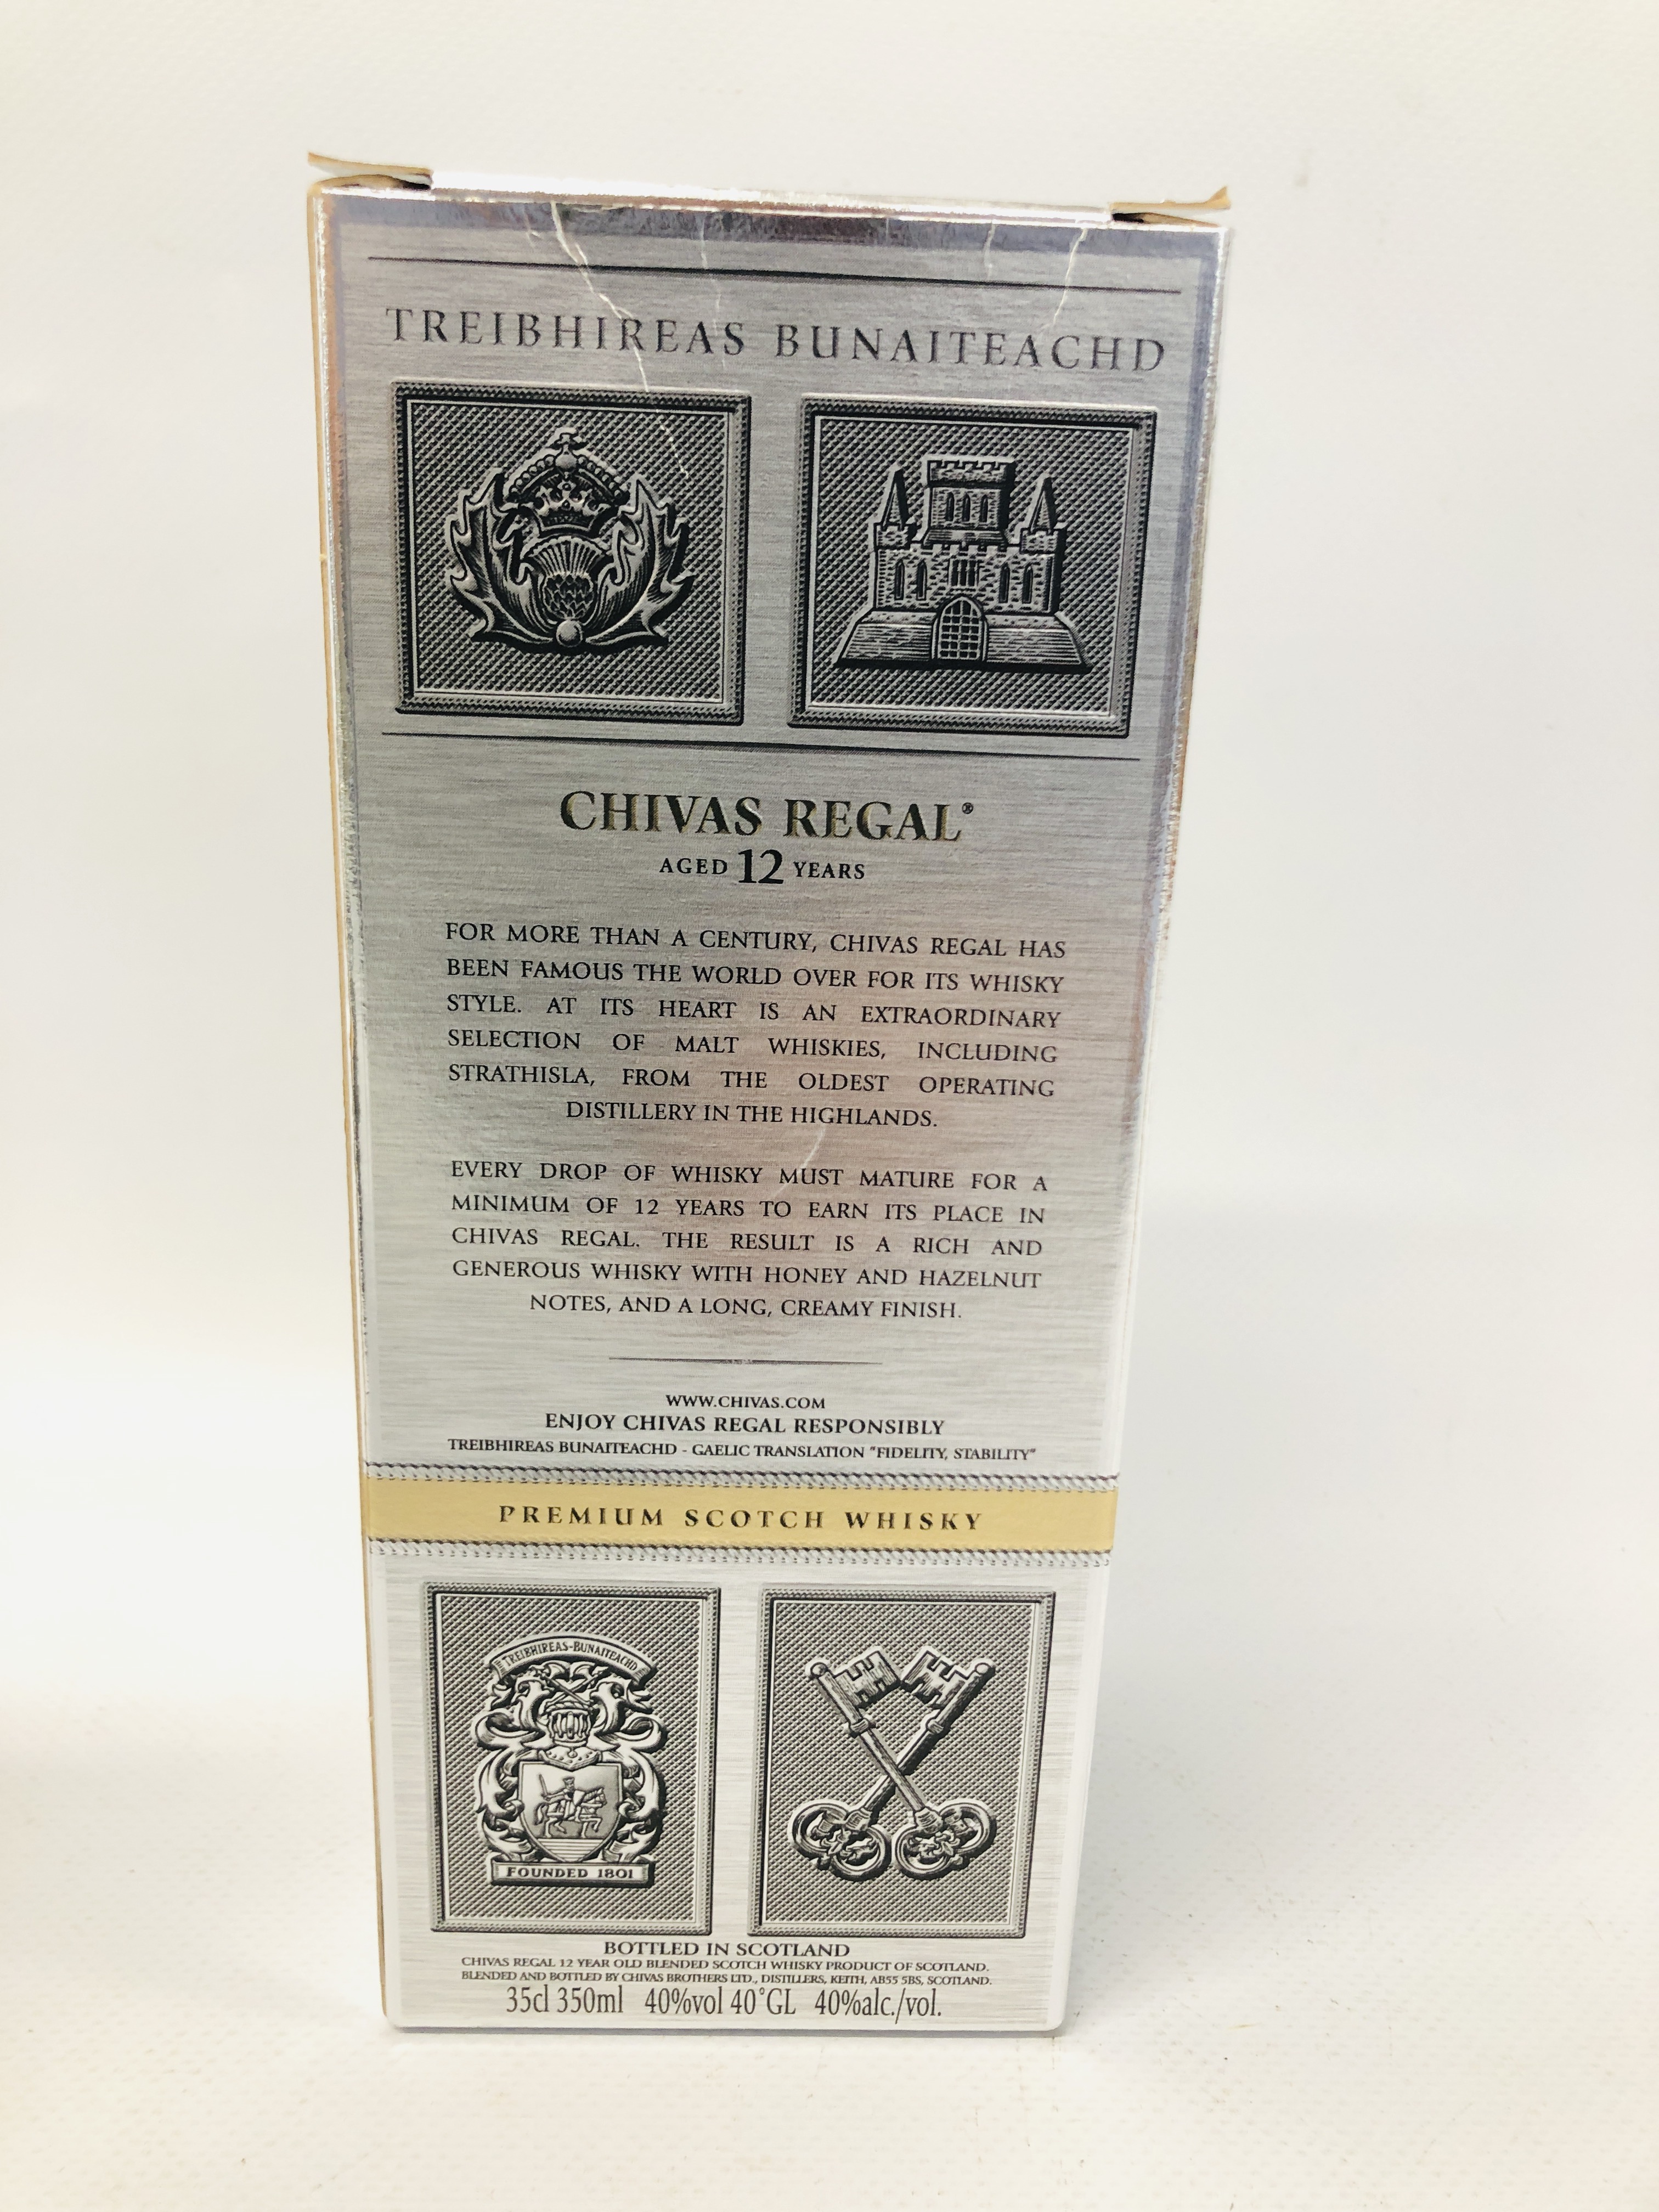 CHIVAS REGAL SCOTCH WHISKY 350ML (BOXED), WADE BELLS WHISKY 18. - Image 6 of 8